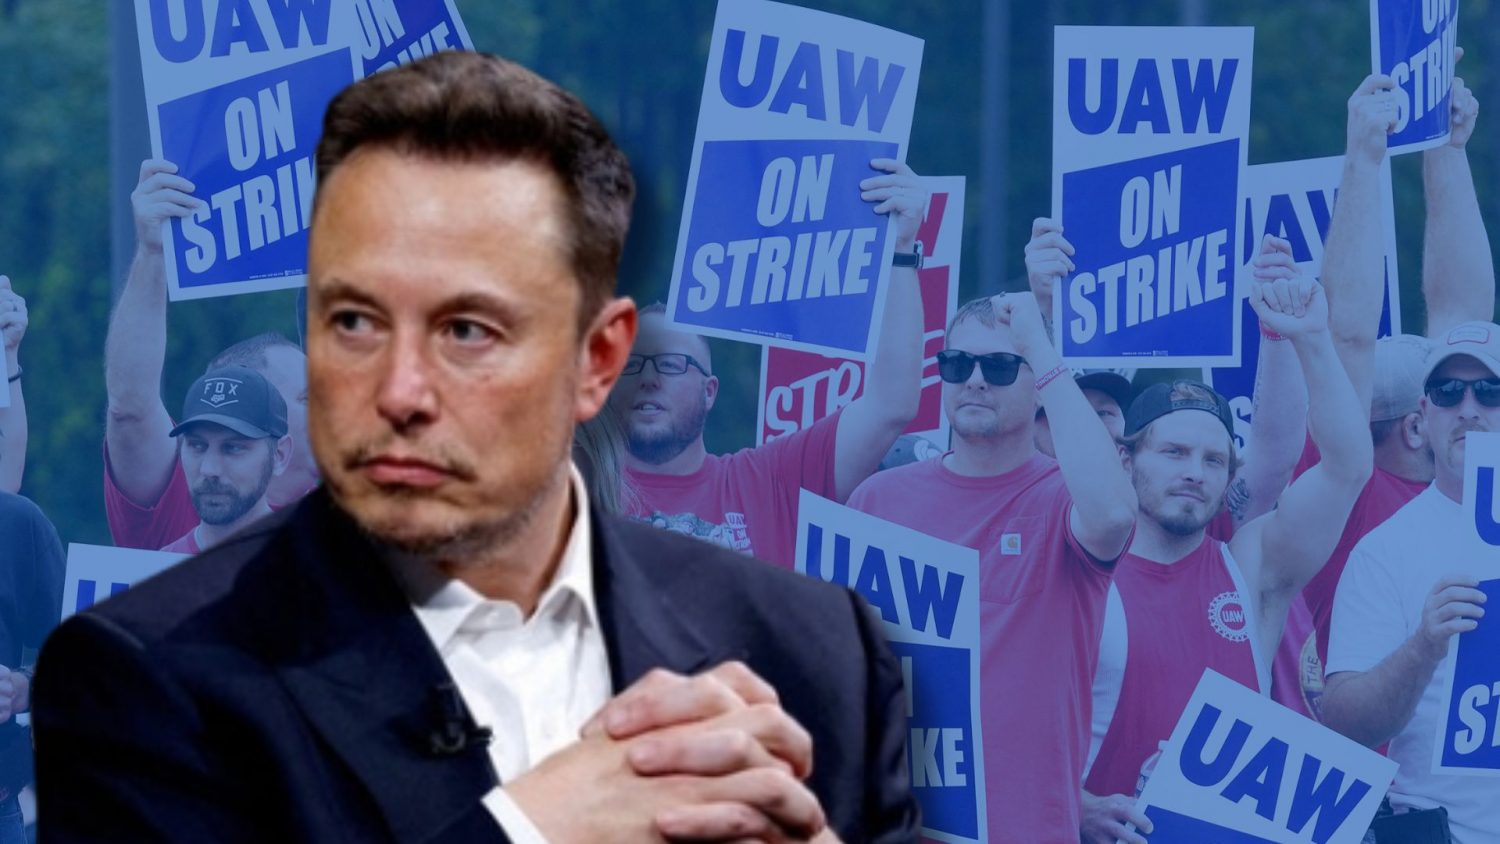 Tesla manufacturing employees are set to receive a "market adjustment" raise as the UAW doubles down on its efforts to unionize the company.